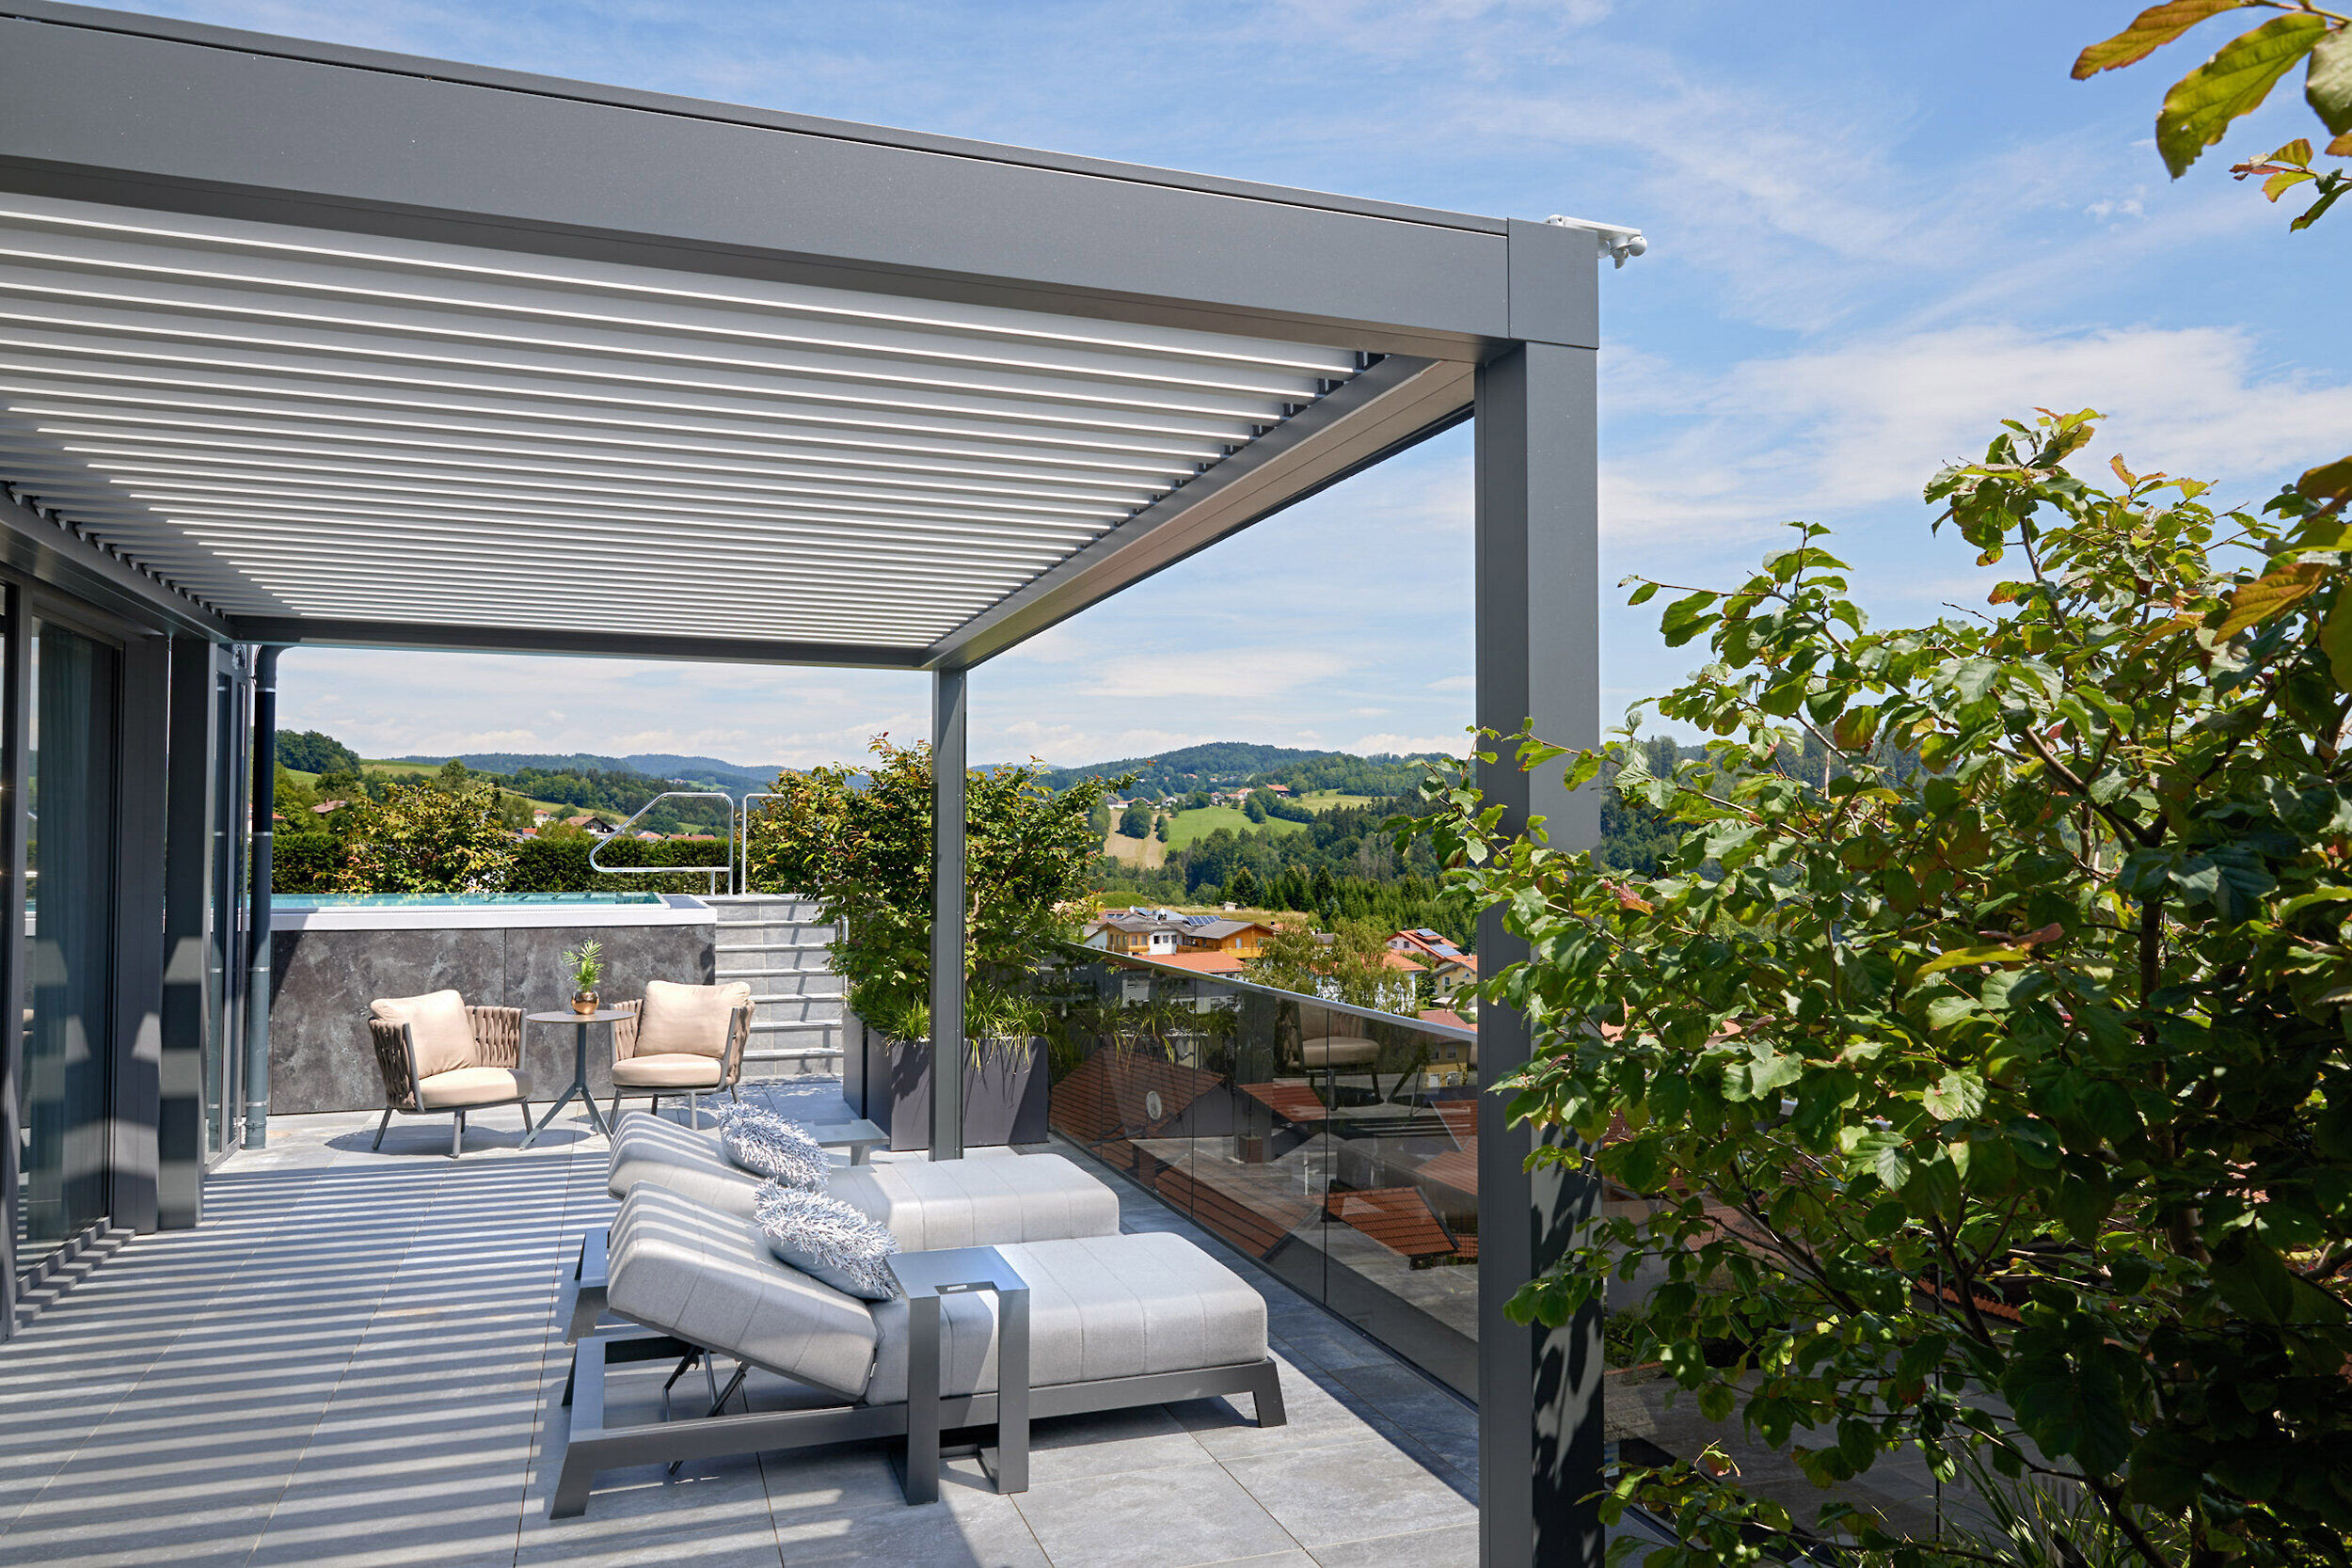 Rooftop-Pool-Suite - 140 qm Dachterrasse mit 10 x 3 m Infinity-Pool